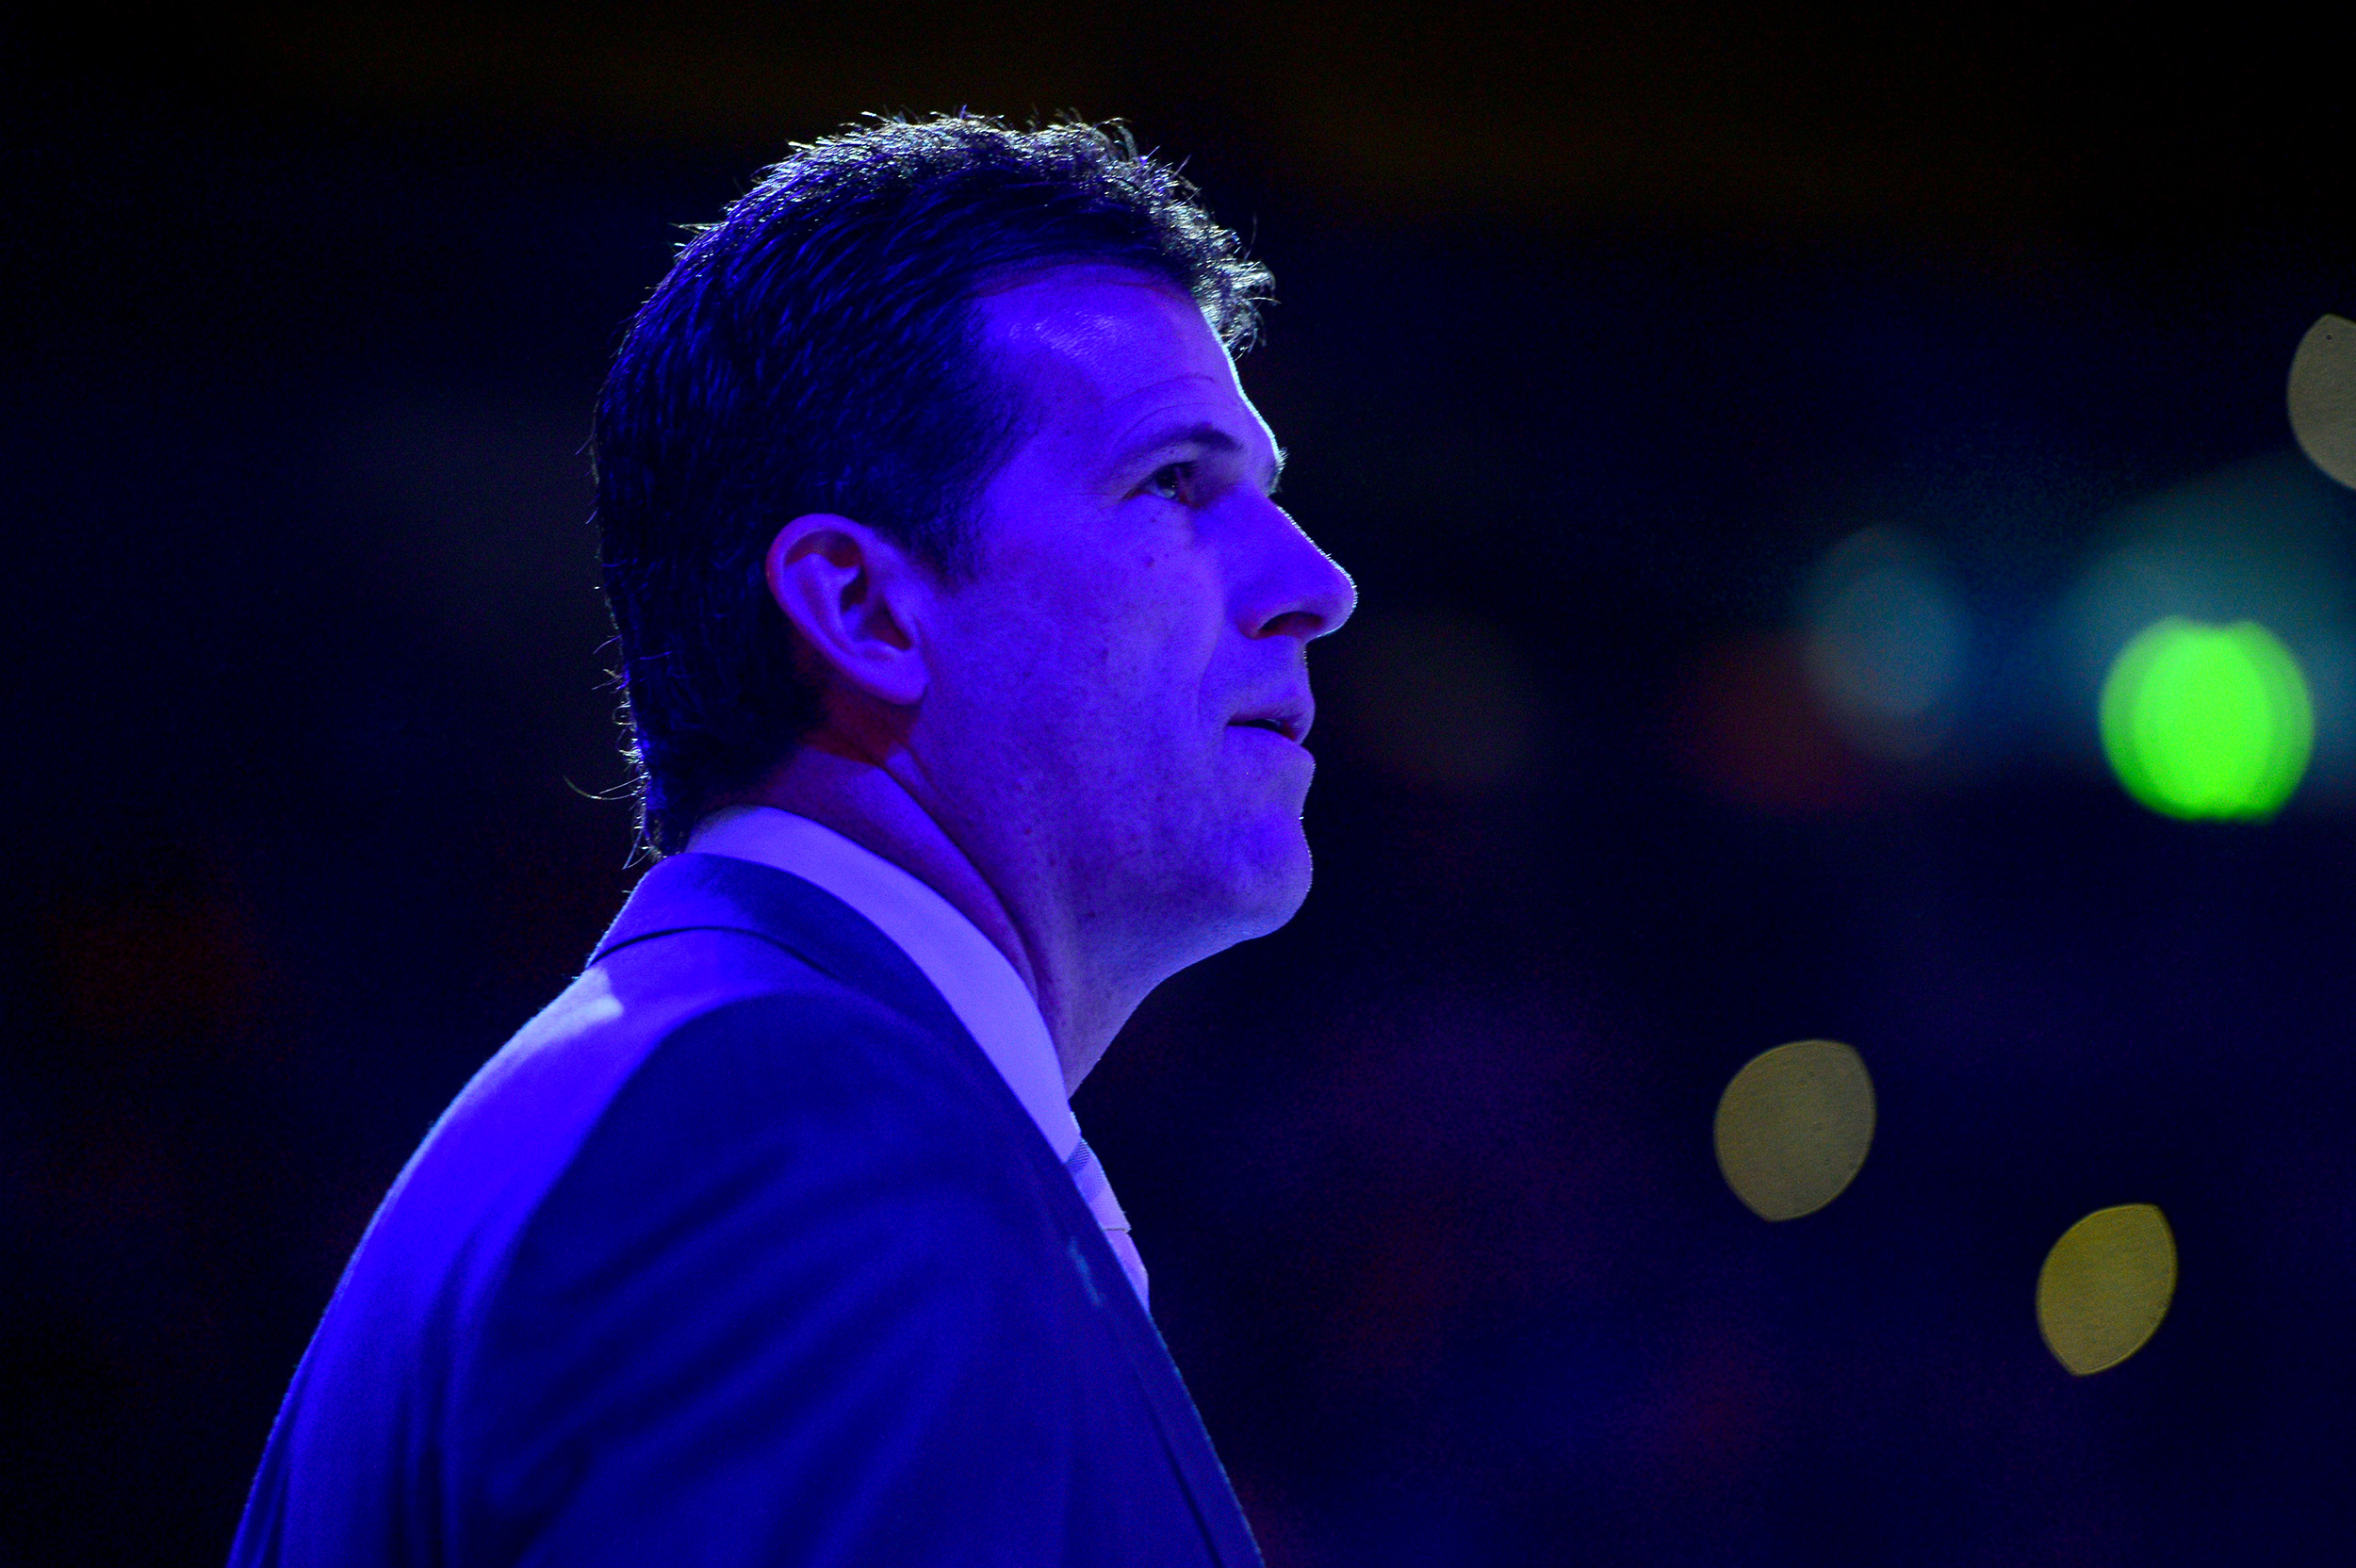 UCLA head coach Steve Alford stands during the introductions before the Bruins' 72-63 win over Oregon on Feb.14, 2015. (Michael Owen Baker/Staff)